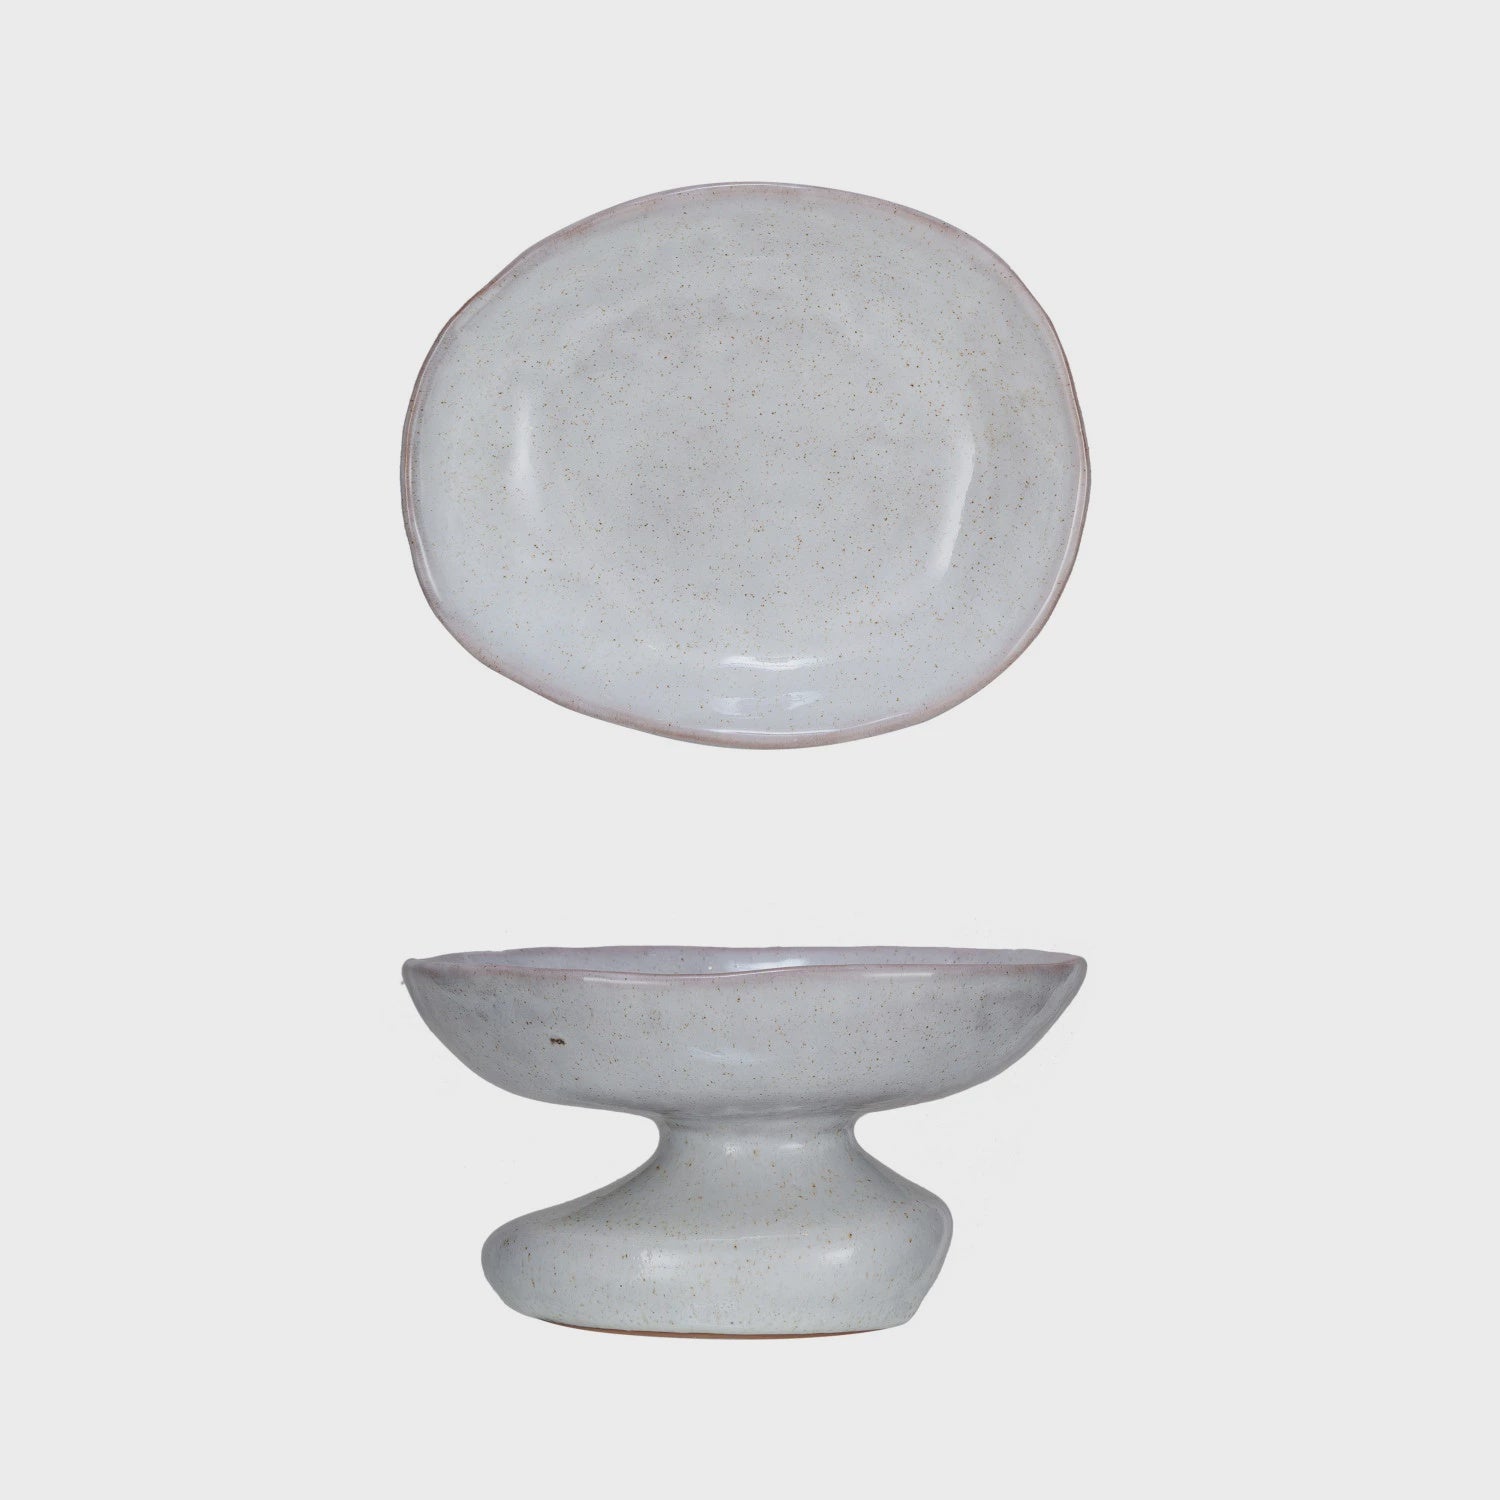 A simple speckled grey ceramic plate at the top and a matching pedestal bowl beneath, featuring a Bungalow style, displayed against a white background.